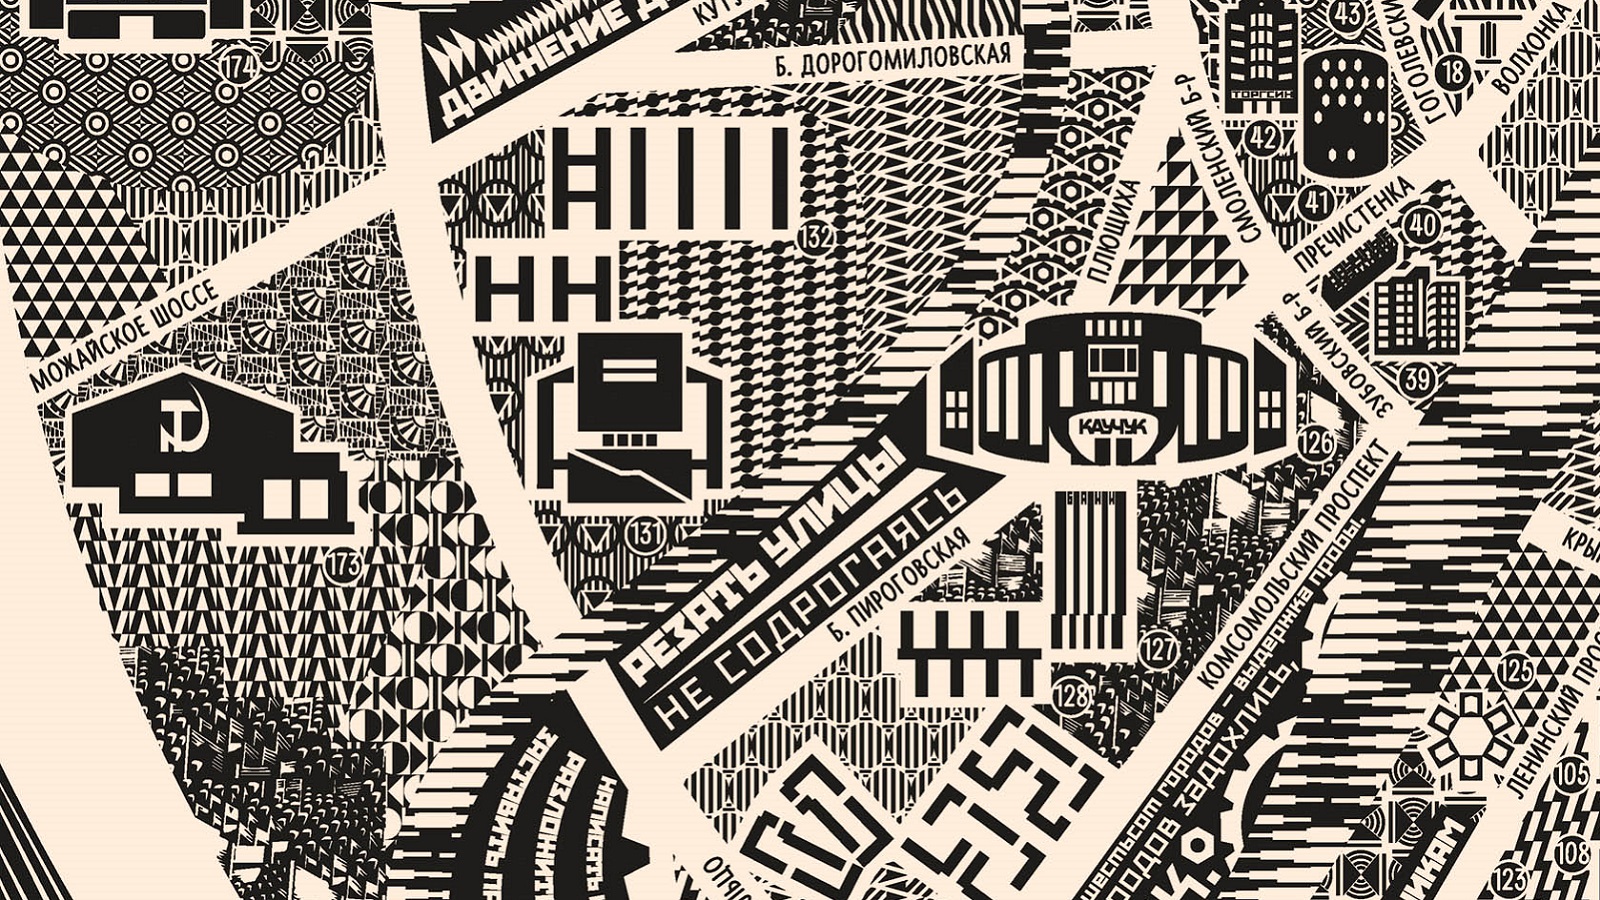 Map of Constructivist Moscow Aims to Preserve Architectural Avant-Garde Heritage of Moscow